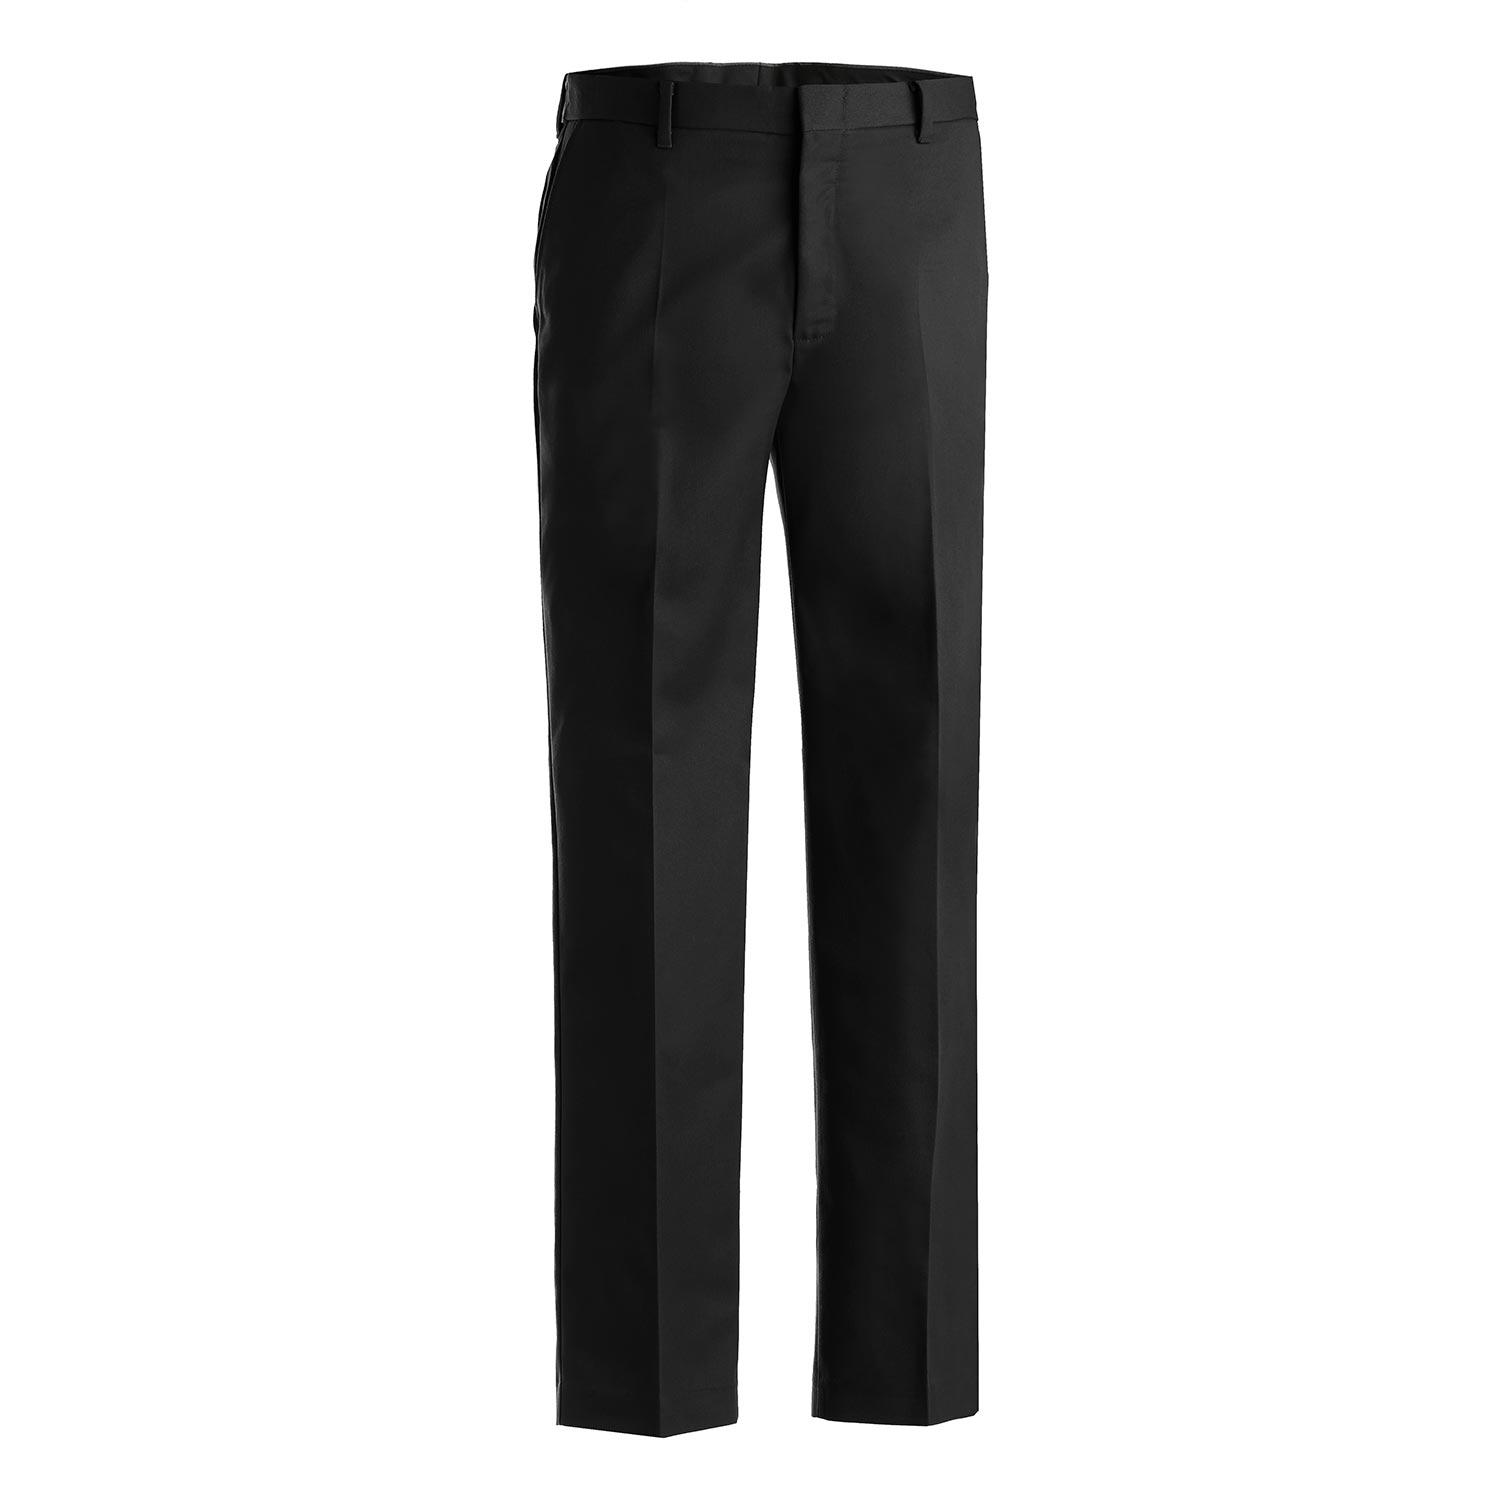 EDWARDS MEN'S BUSINESS CHINO FLAT FRONT PANTS